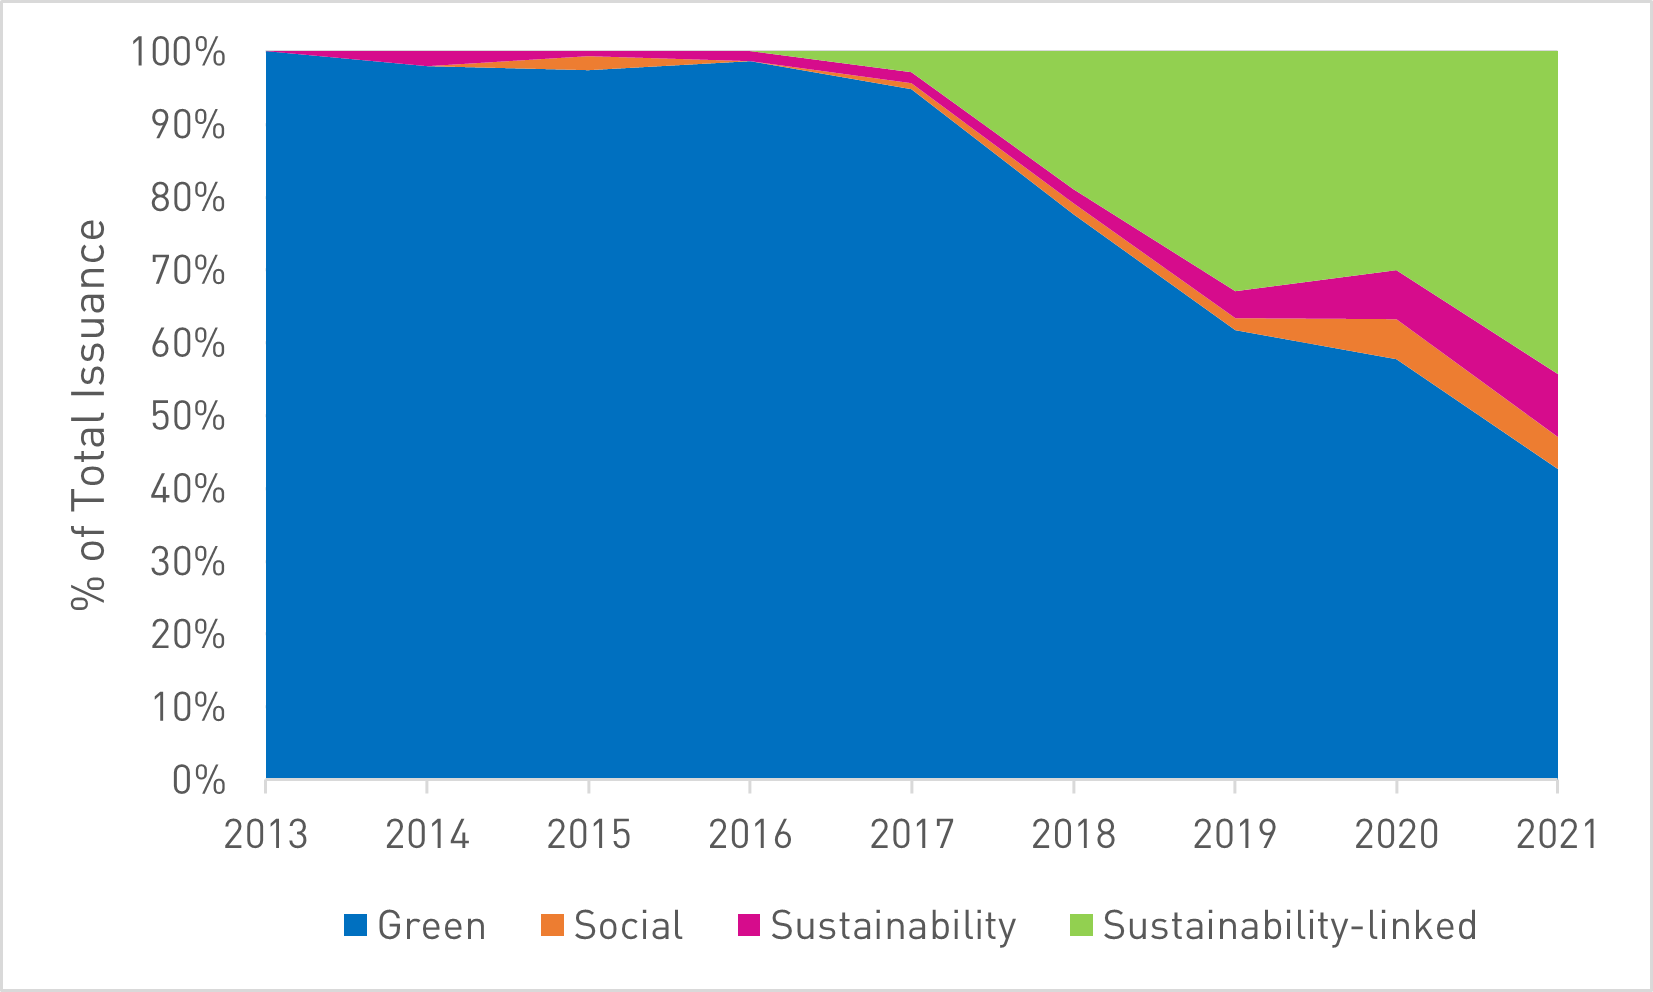 Sustainability linked bonds taking up a larger portion of total esg-linked issuances where the market was fully dominated by green bonds back in 2013.